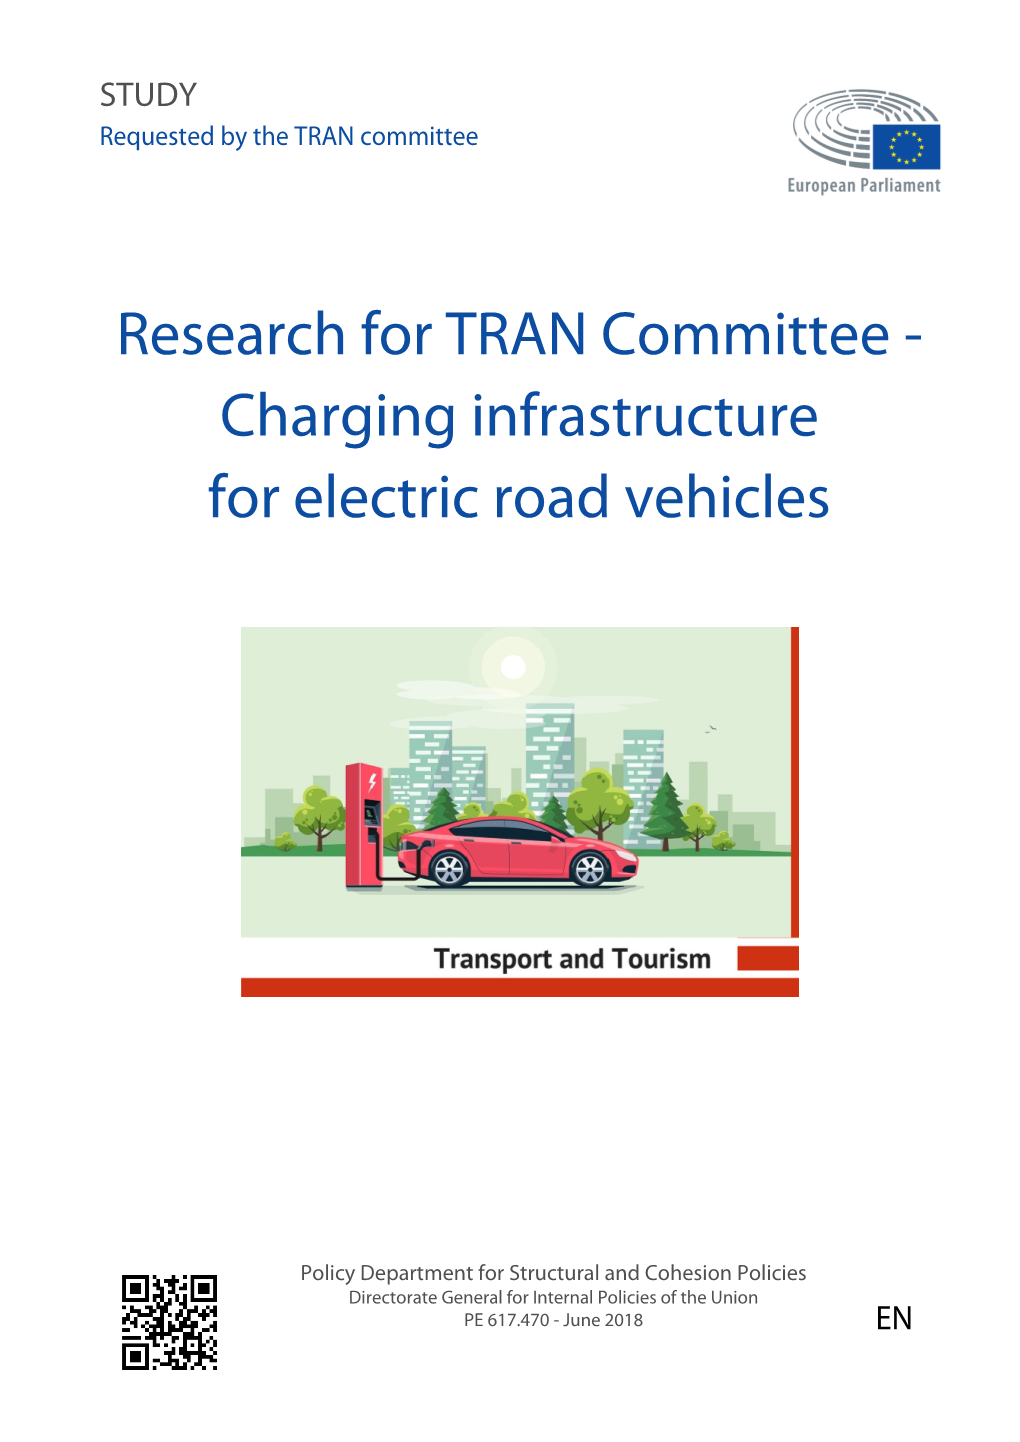 Research for TRAN Committee - Charging Infrastructure for Electric Road Vehicles